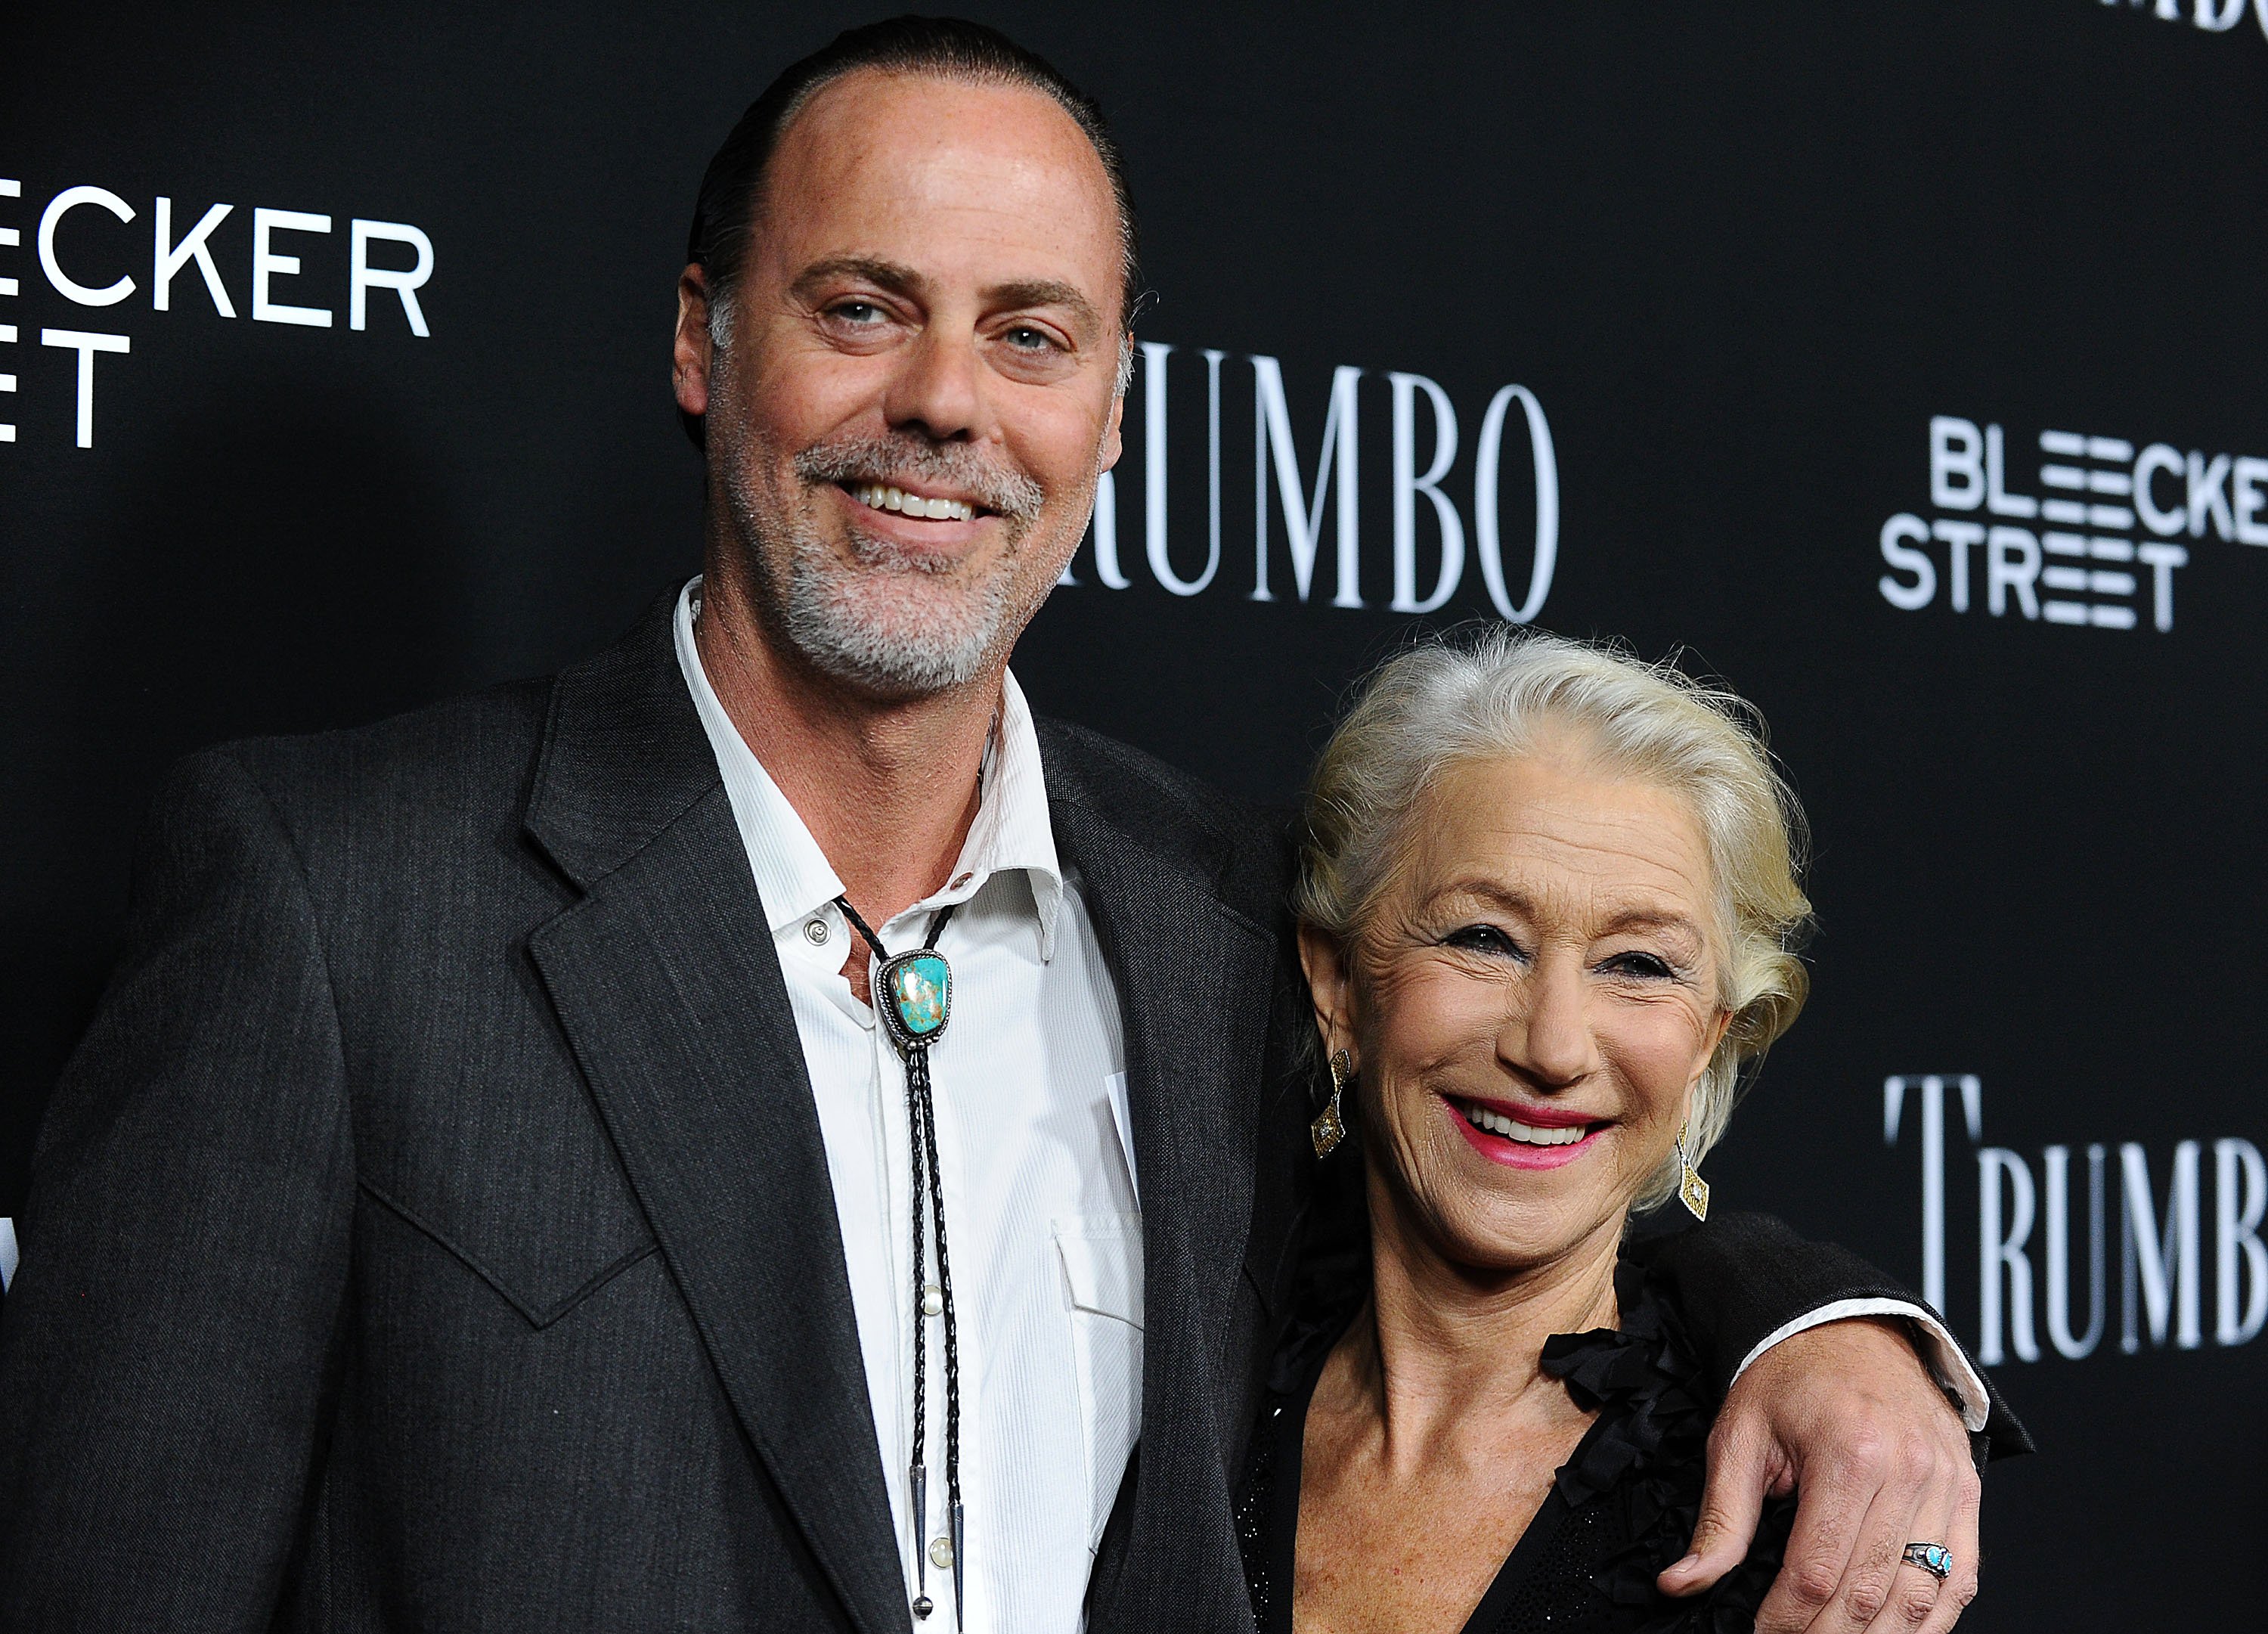 Rio Hackford and Helen Mirren at the premiere of "Trumbo" on October 27, 2015, in Beverly Hills, California. | Source: Getty Images